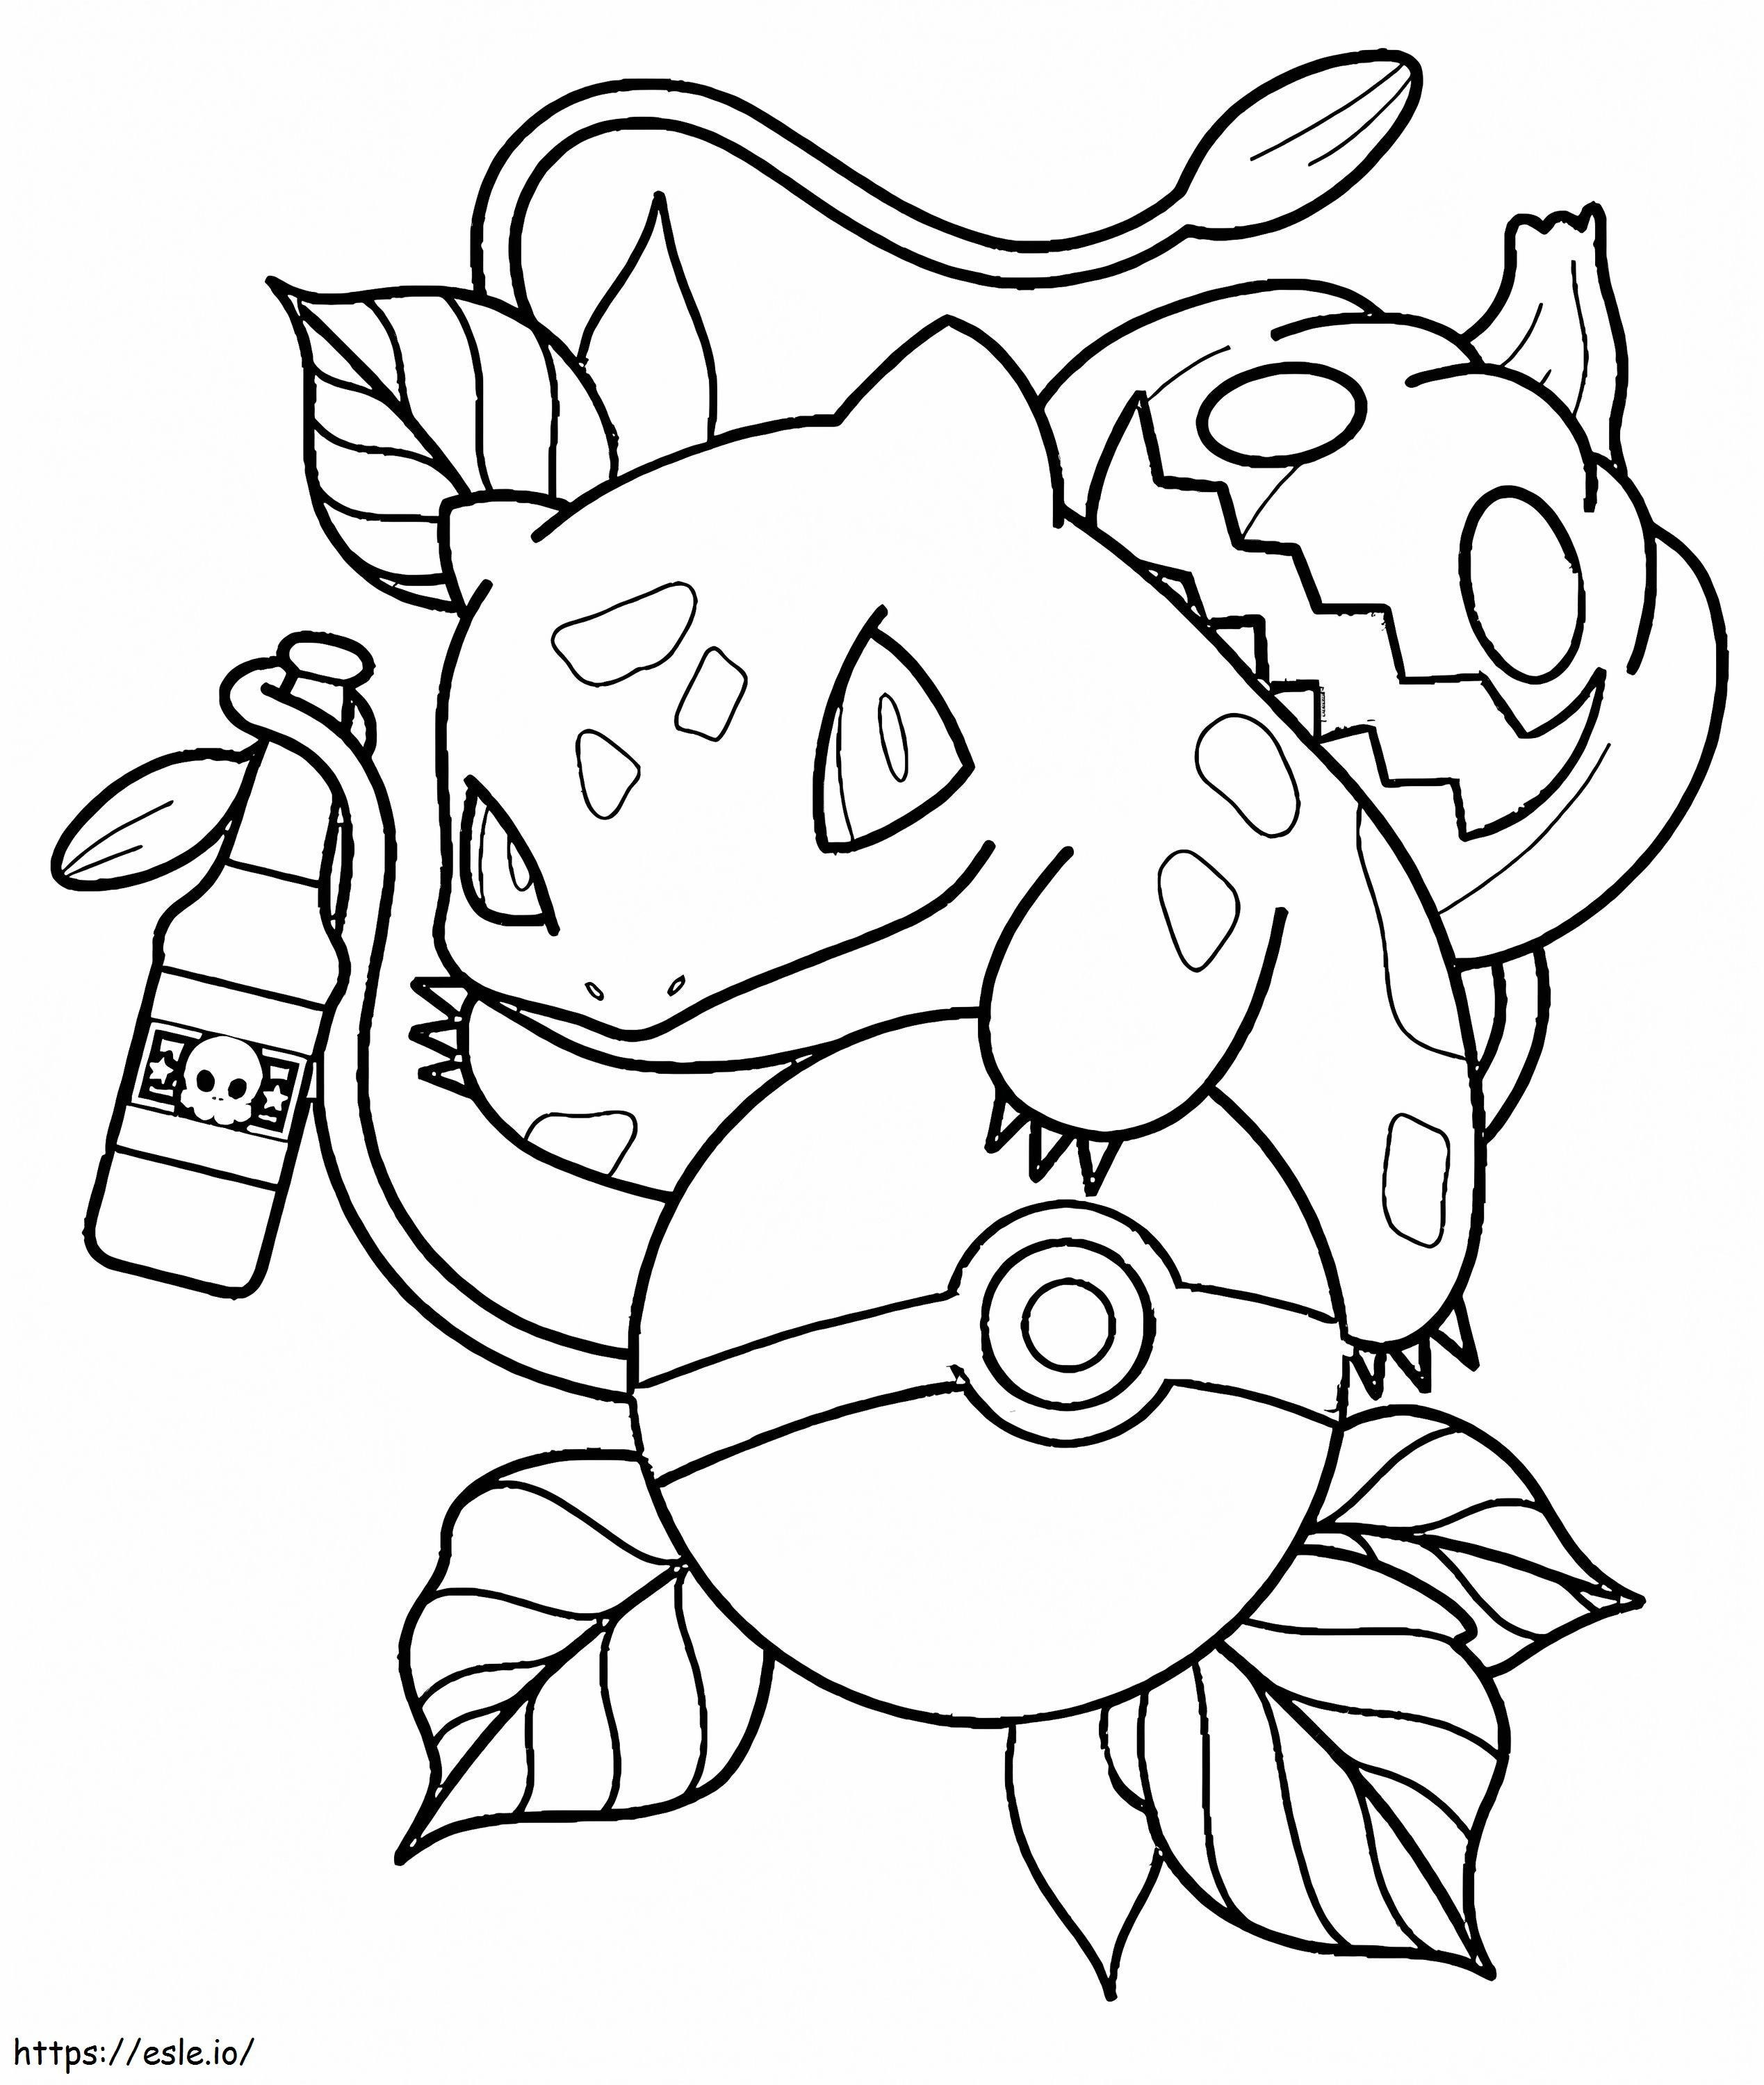 Halloween Bulbasaur coloring page